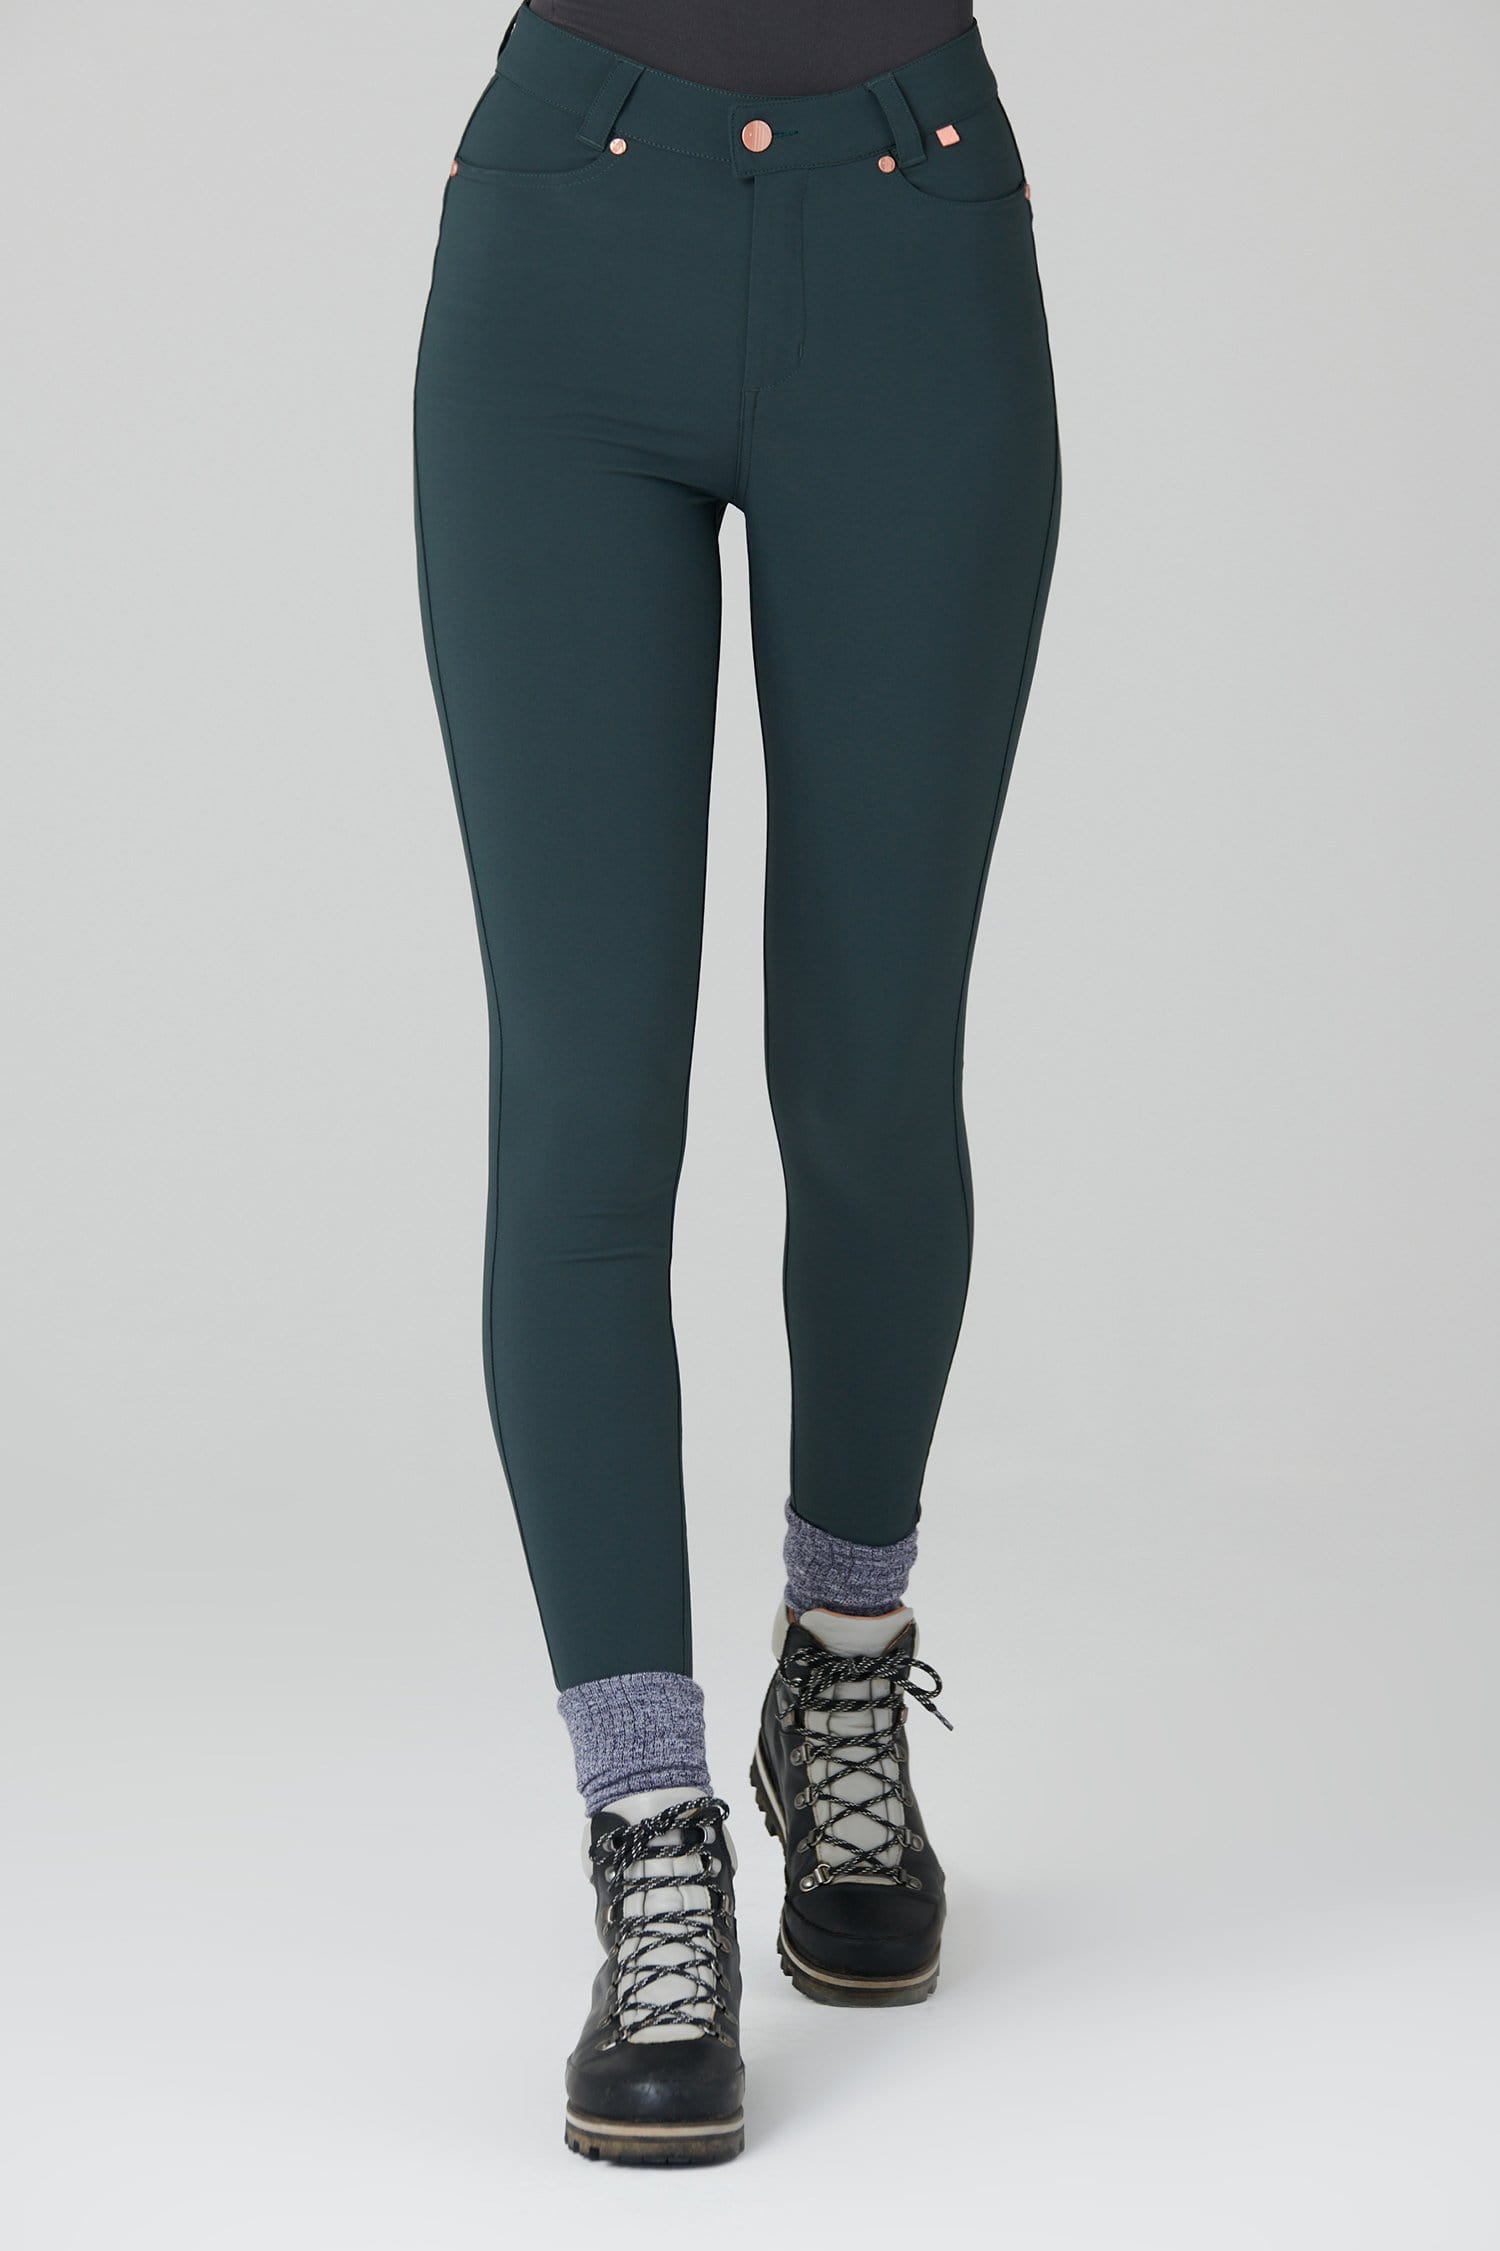 Thermal Skinny Outdoor Trousers - Forest Green - 32l / Uk14 - Womens - Acai Outdoorwear